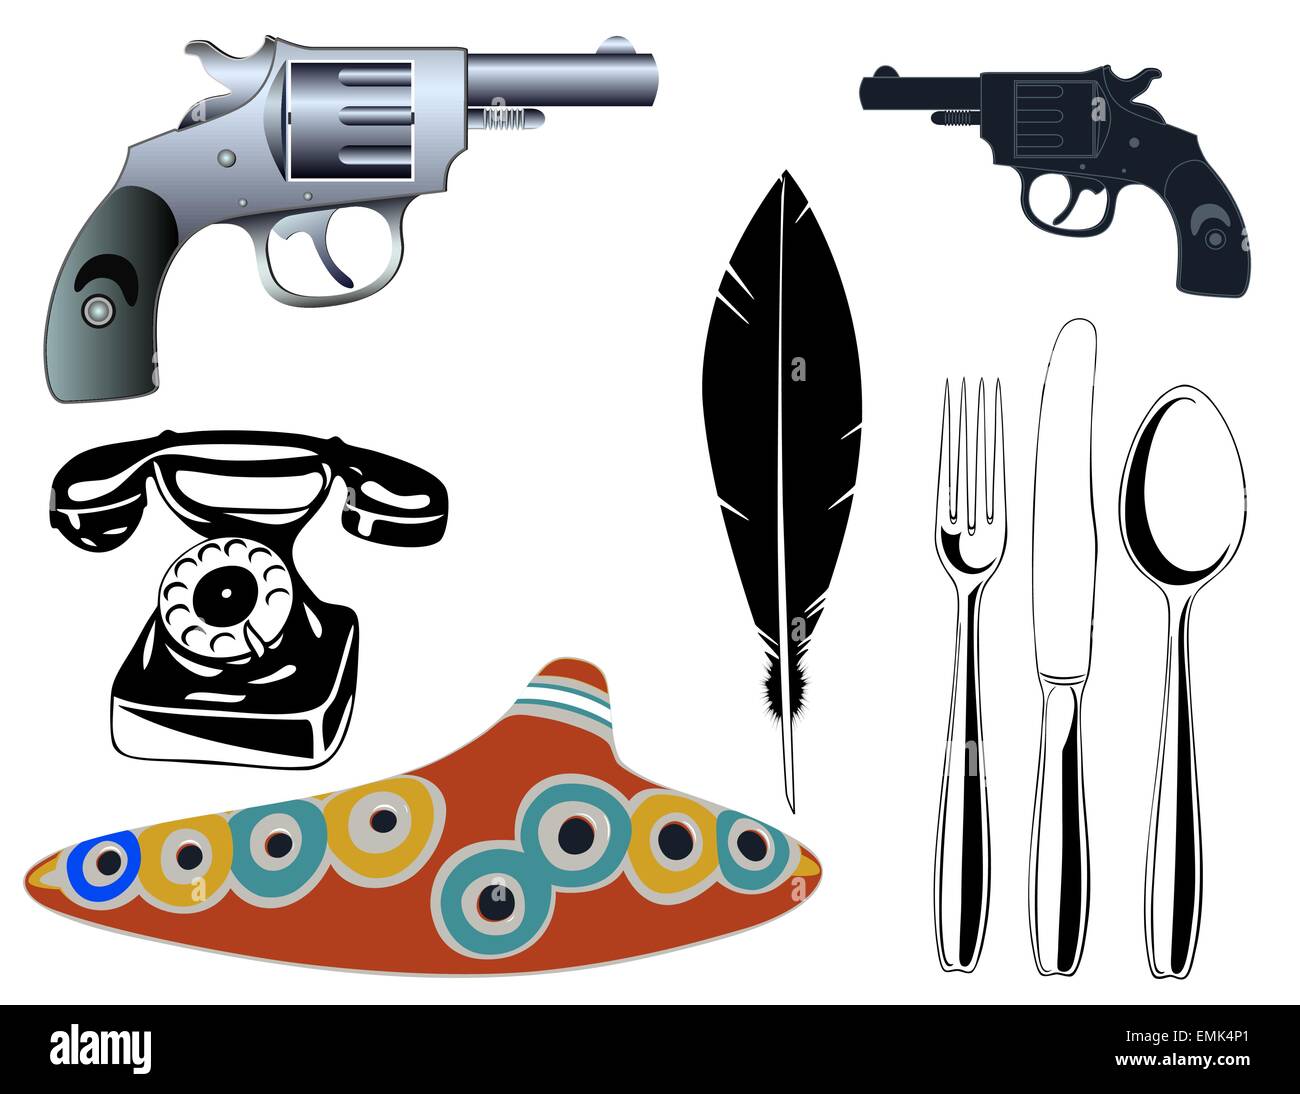 Vector illustration of the various objects - guns, musical instrument, old telephone, knife, fork and spoon, quill. Stock Vector